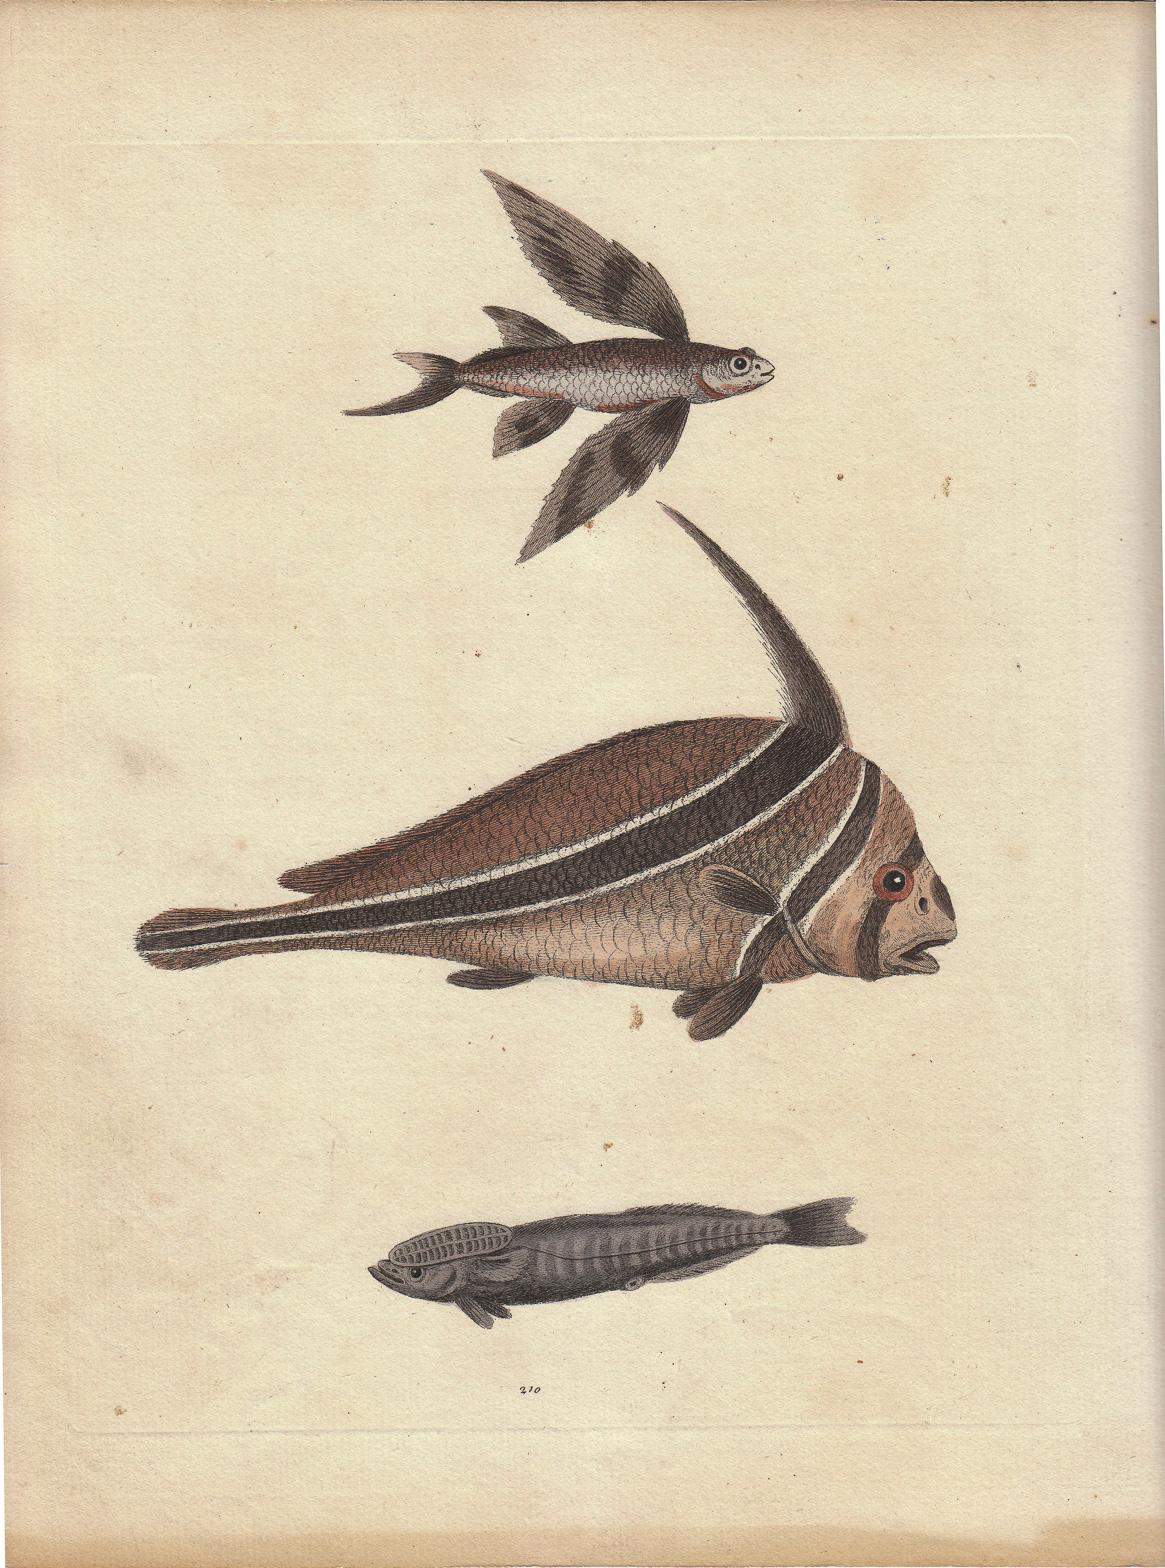 George Edwards Animal Print - Vintage Print, Fish, From "A Natural History of Uncommon Birds..."